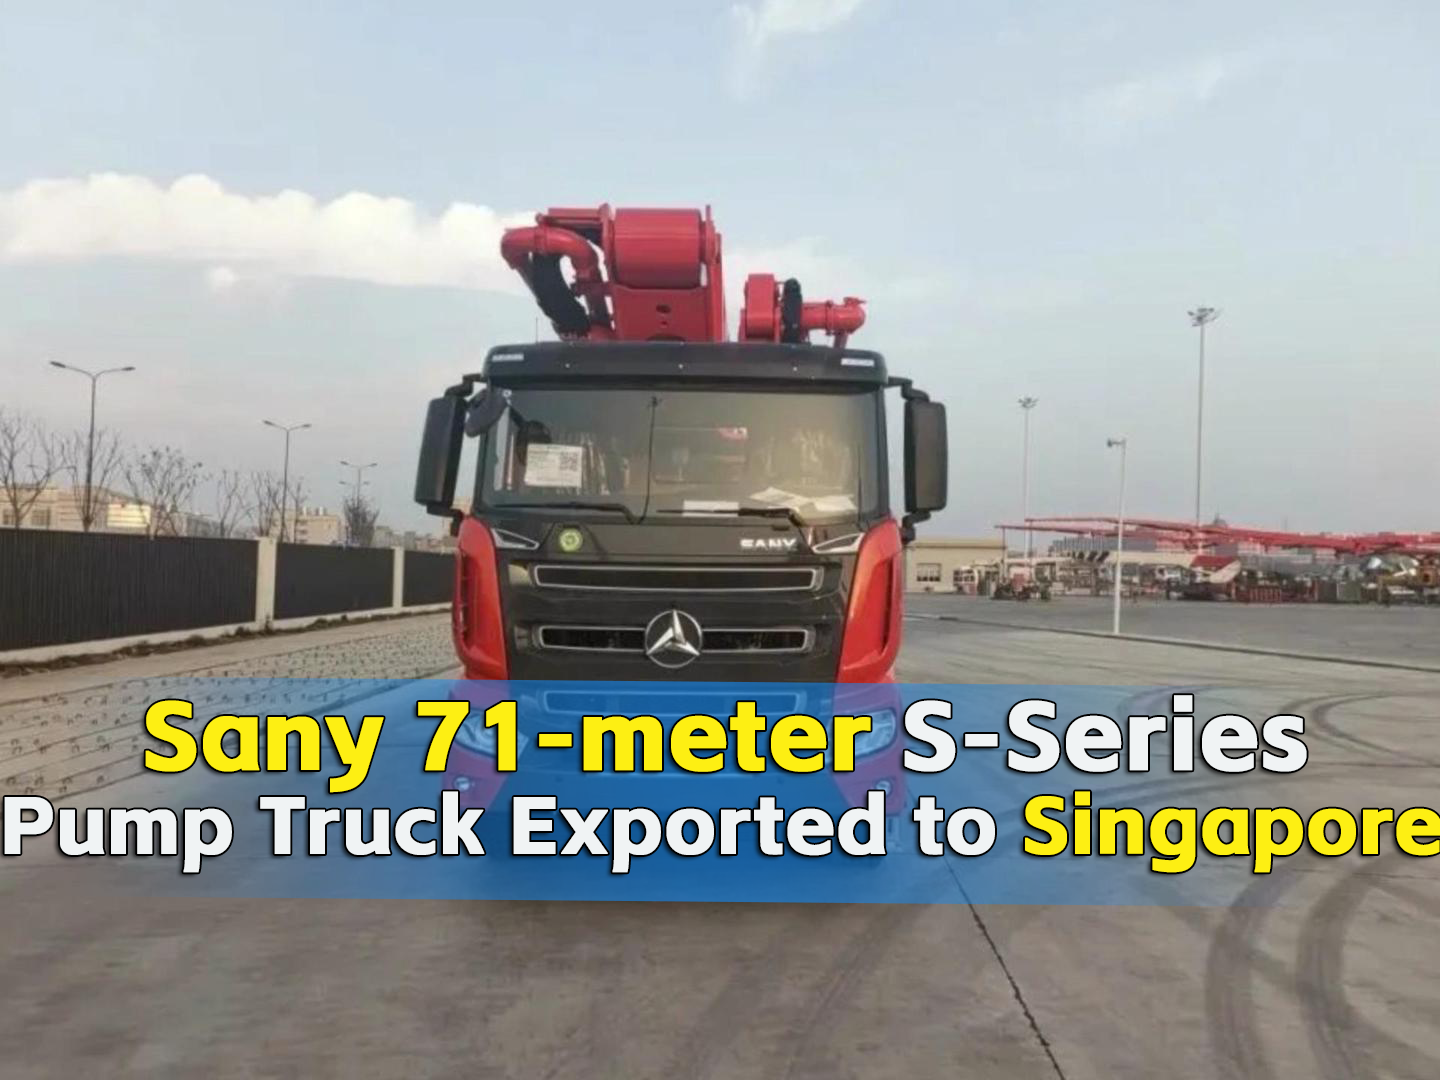 SANY 71m S Series Pump Truck Was Exported to Singapore